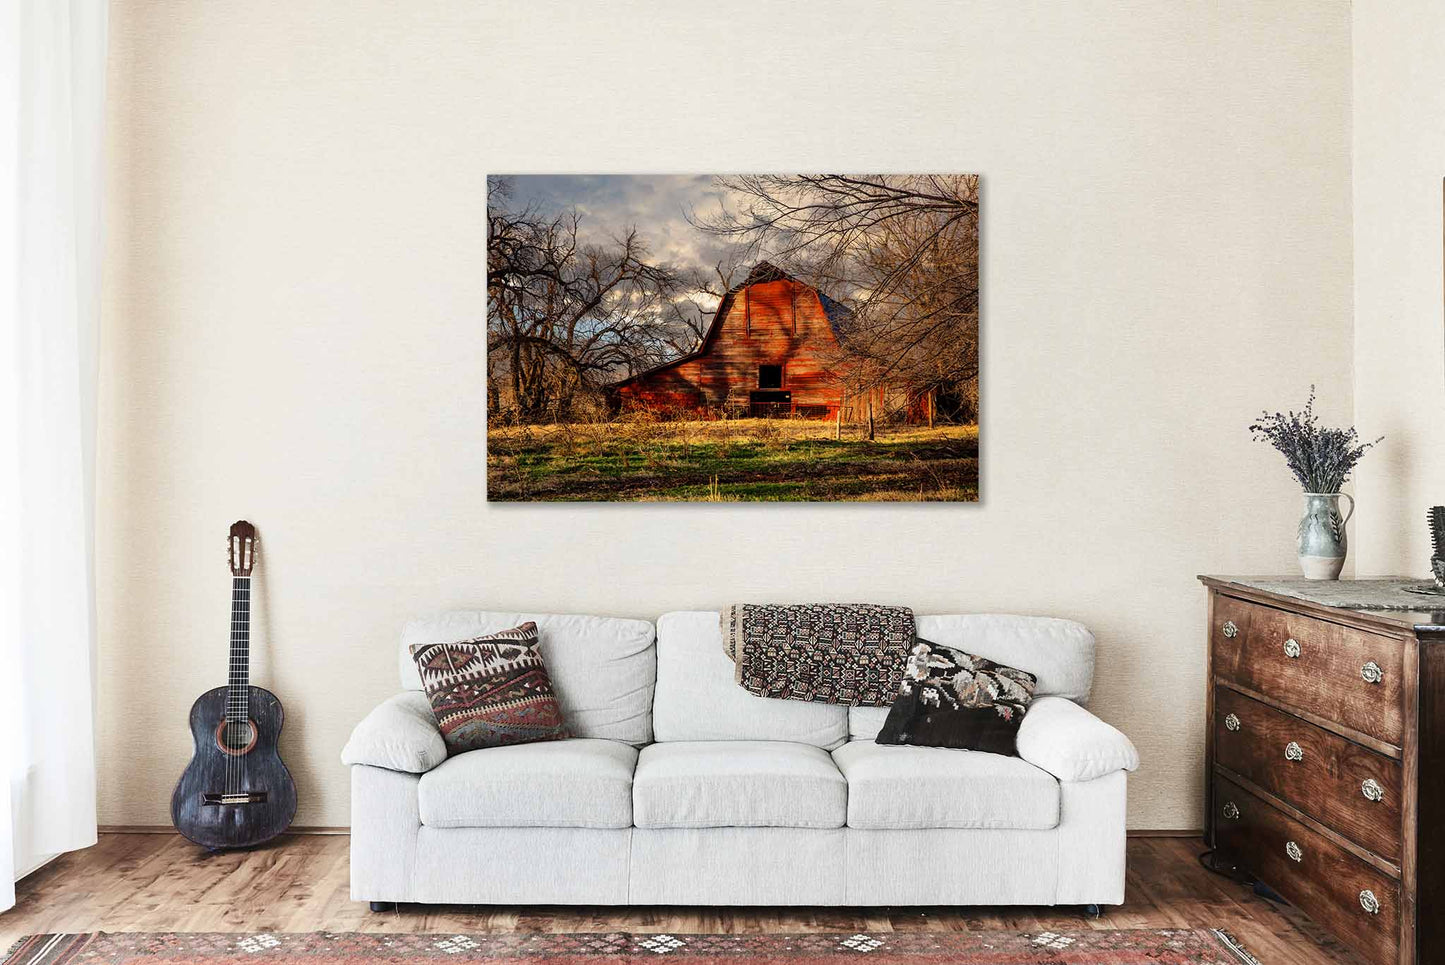 Country Metal Print (Ready to Hang) Photo on Aluminum of Rustic Red Barn in Shadows of Leafless Trees in Oklahoma Farm Wall Art Farmhouse Decor